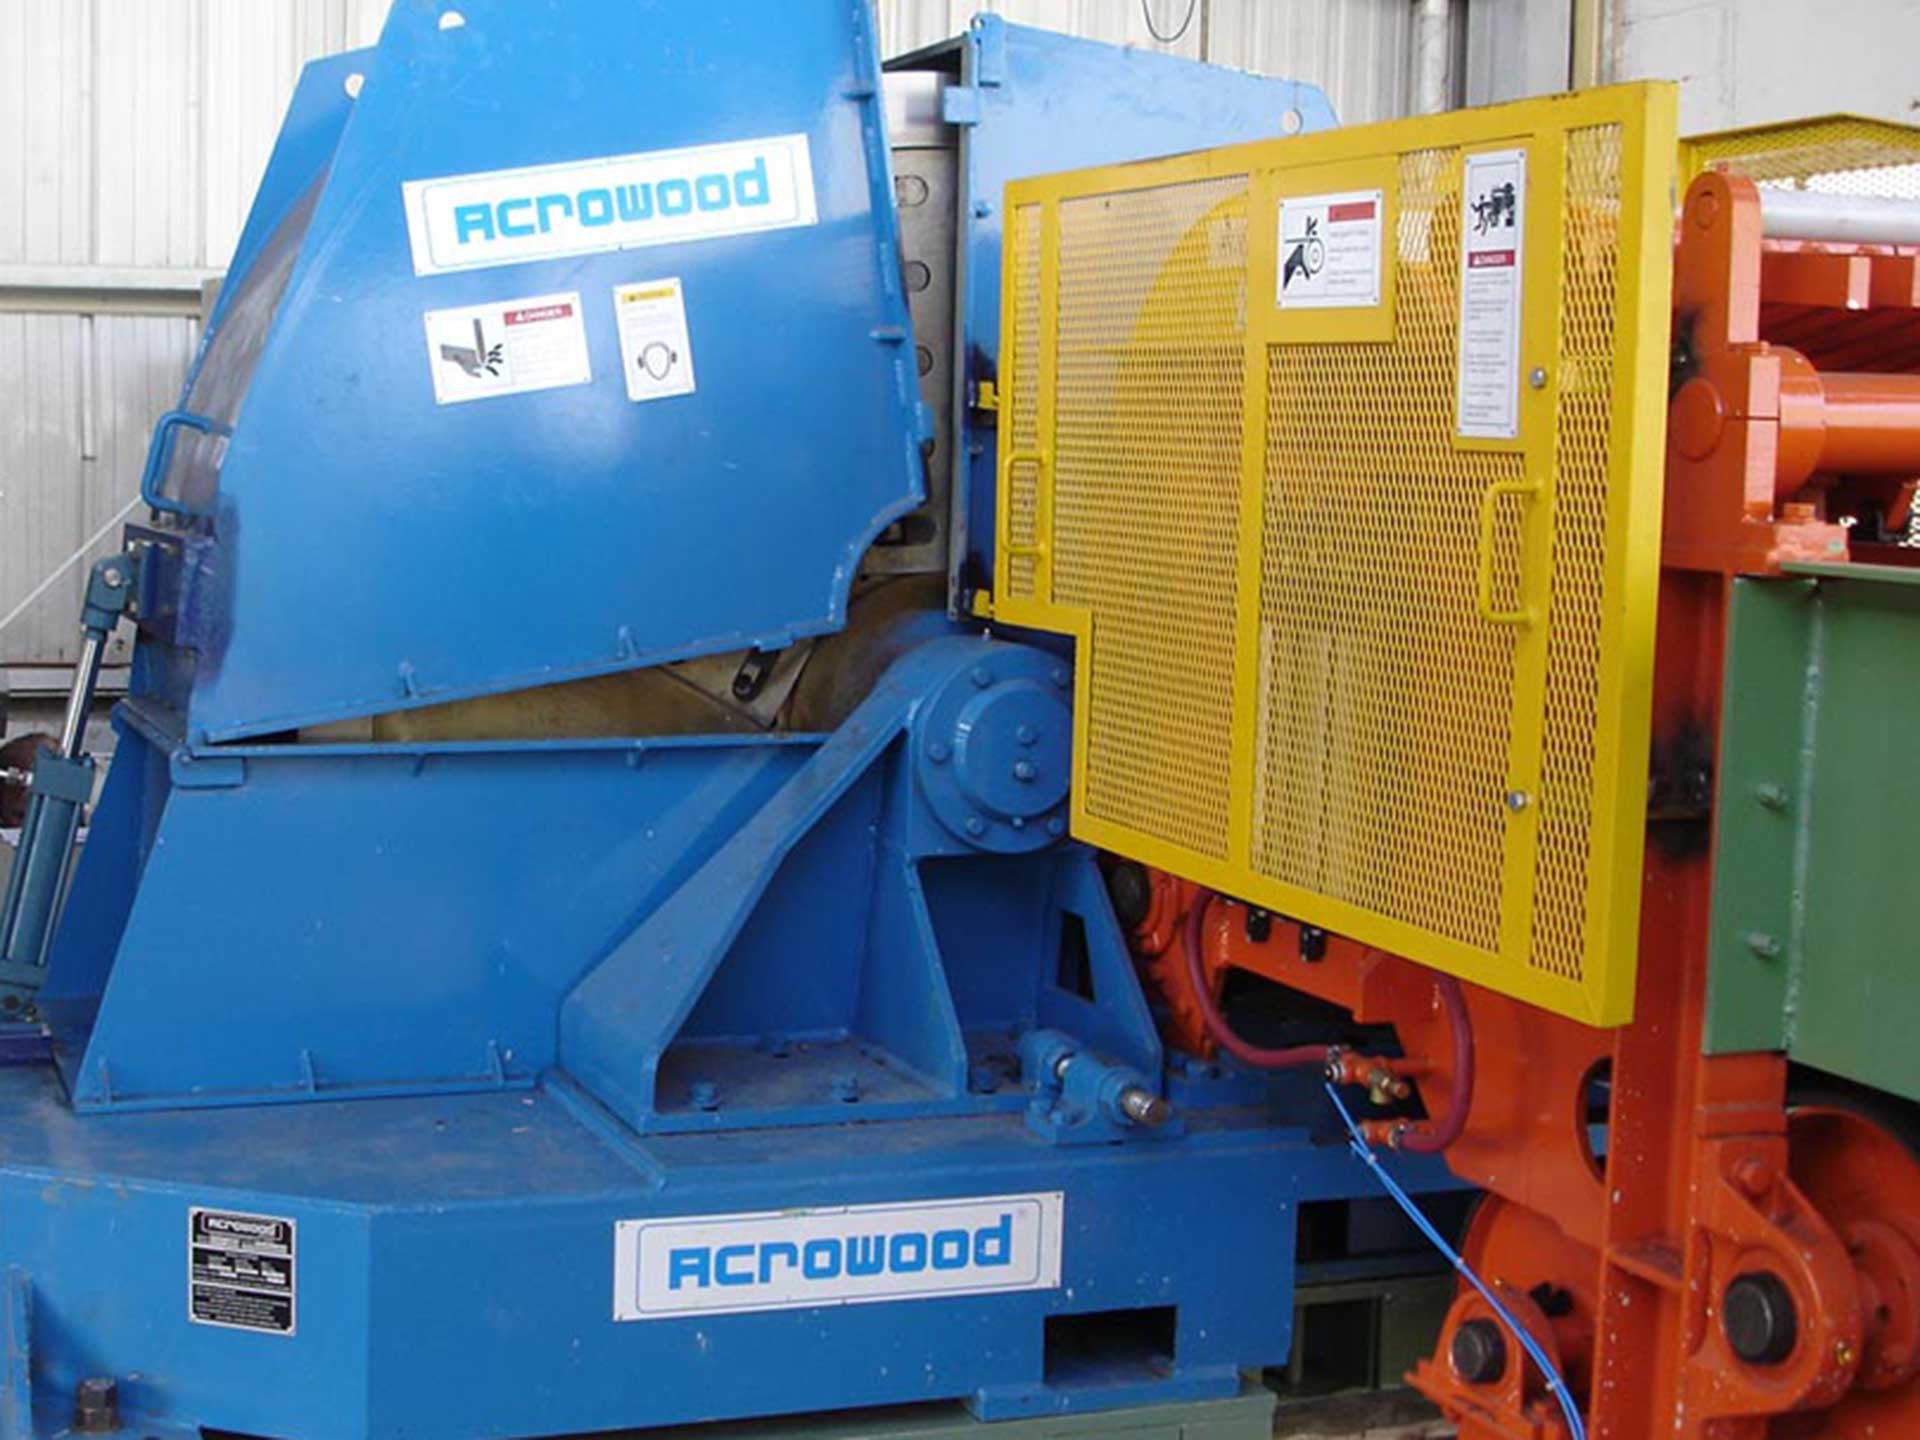 veneer-disk-chipper-and-feedworks-attached